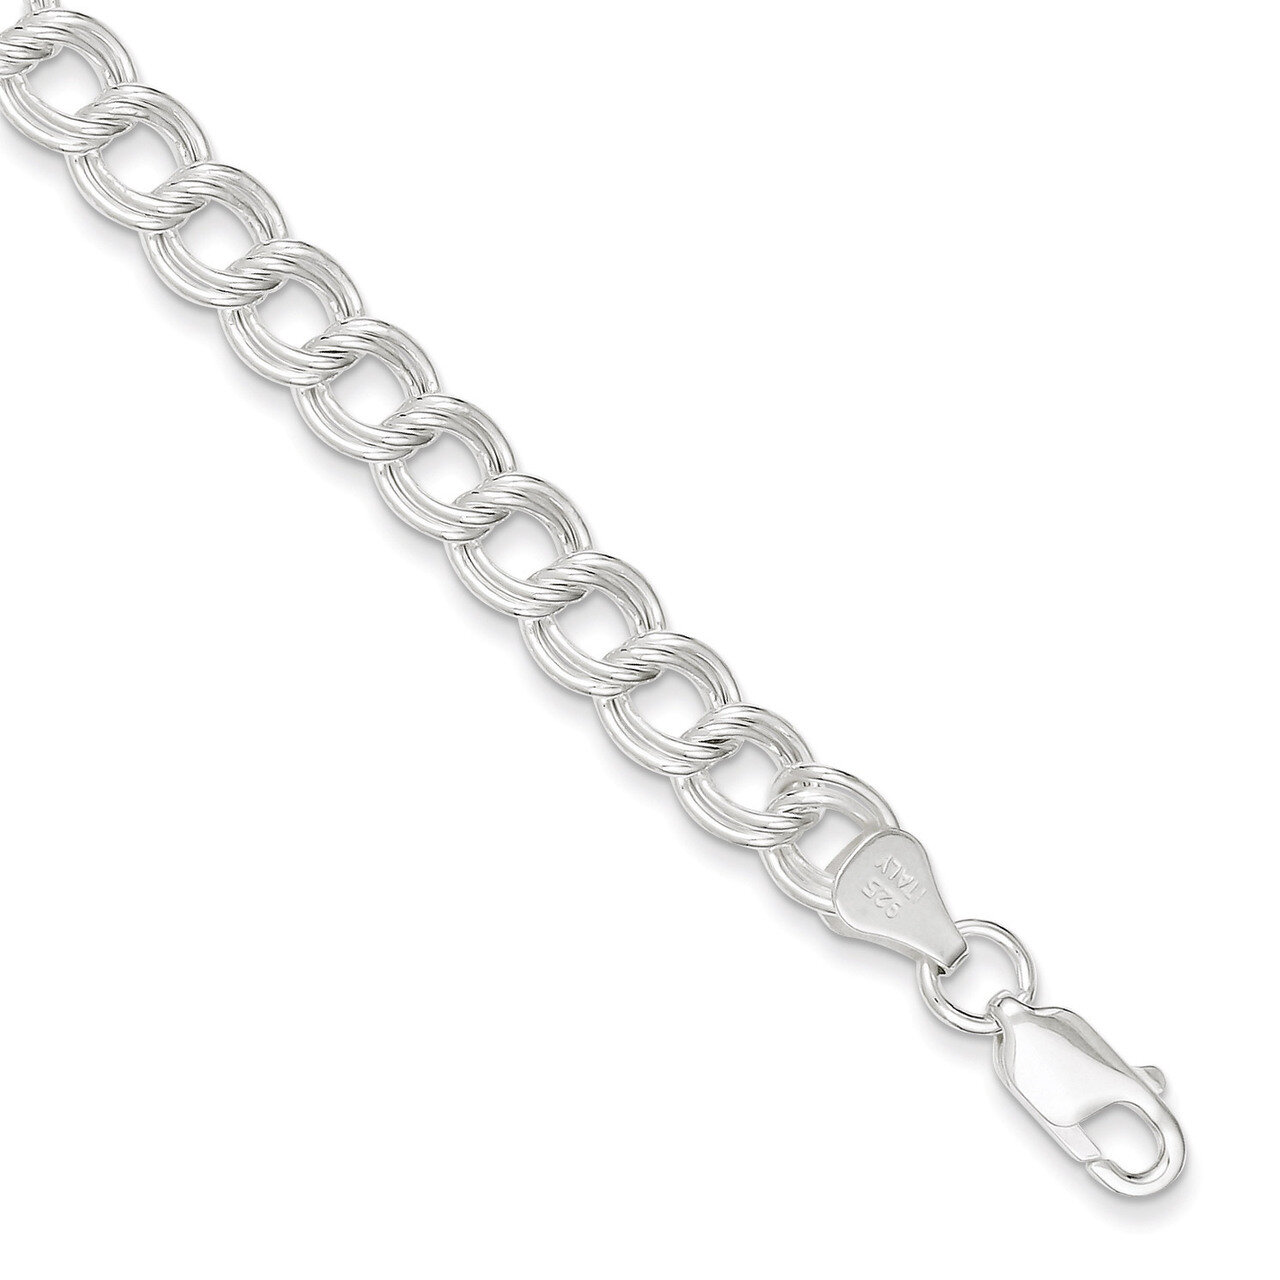 8 Inch Double Link Charm Bracelet Sterling Silver QCH100-8